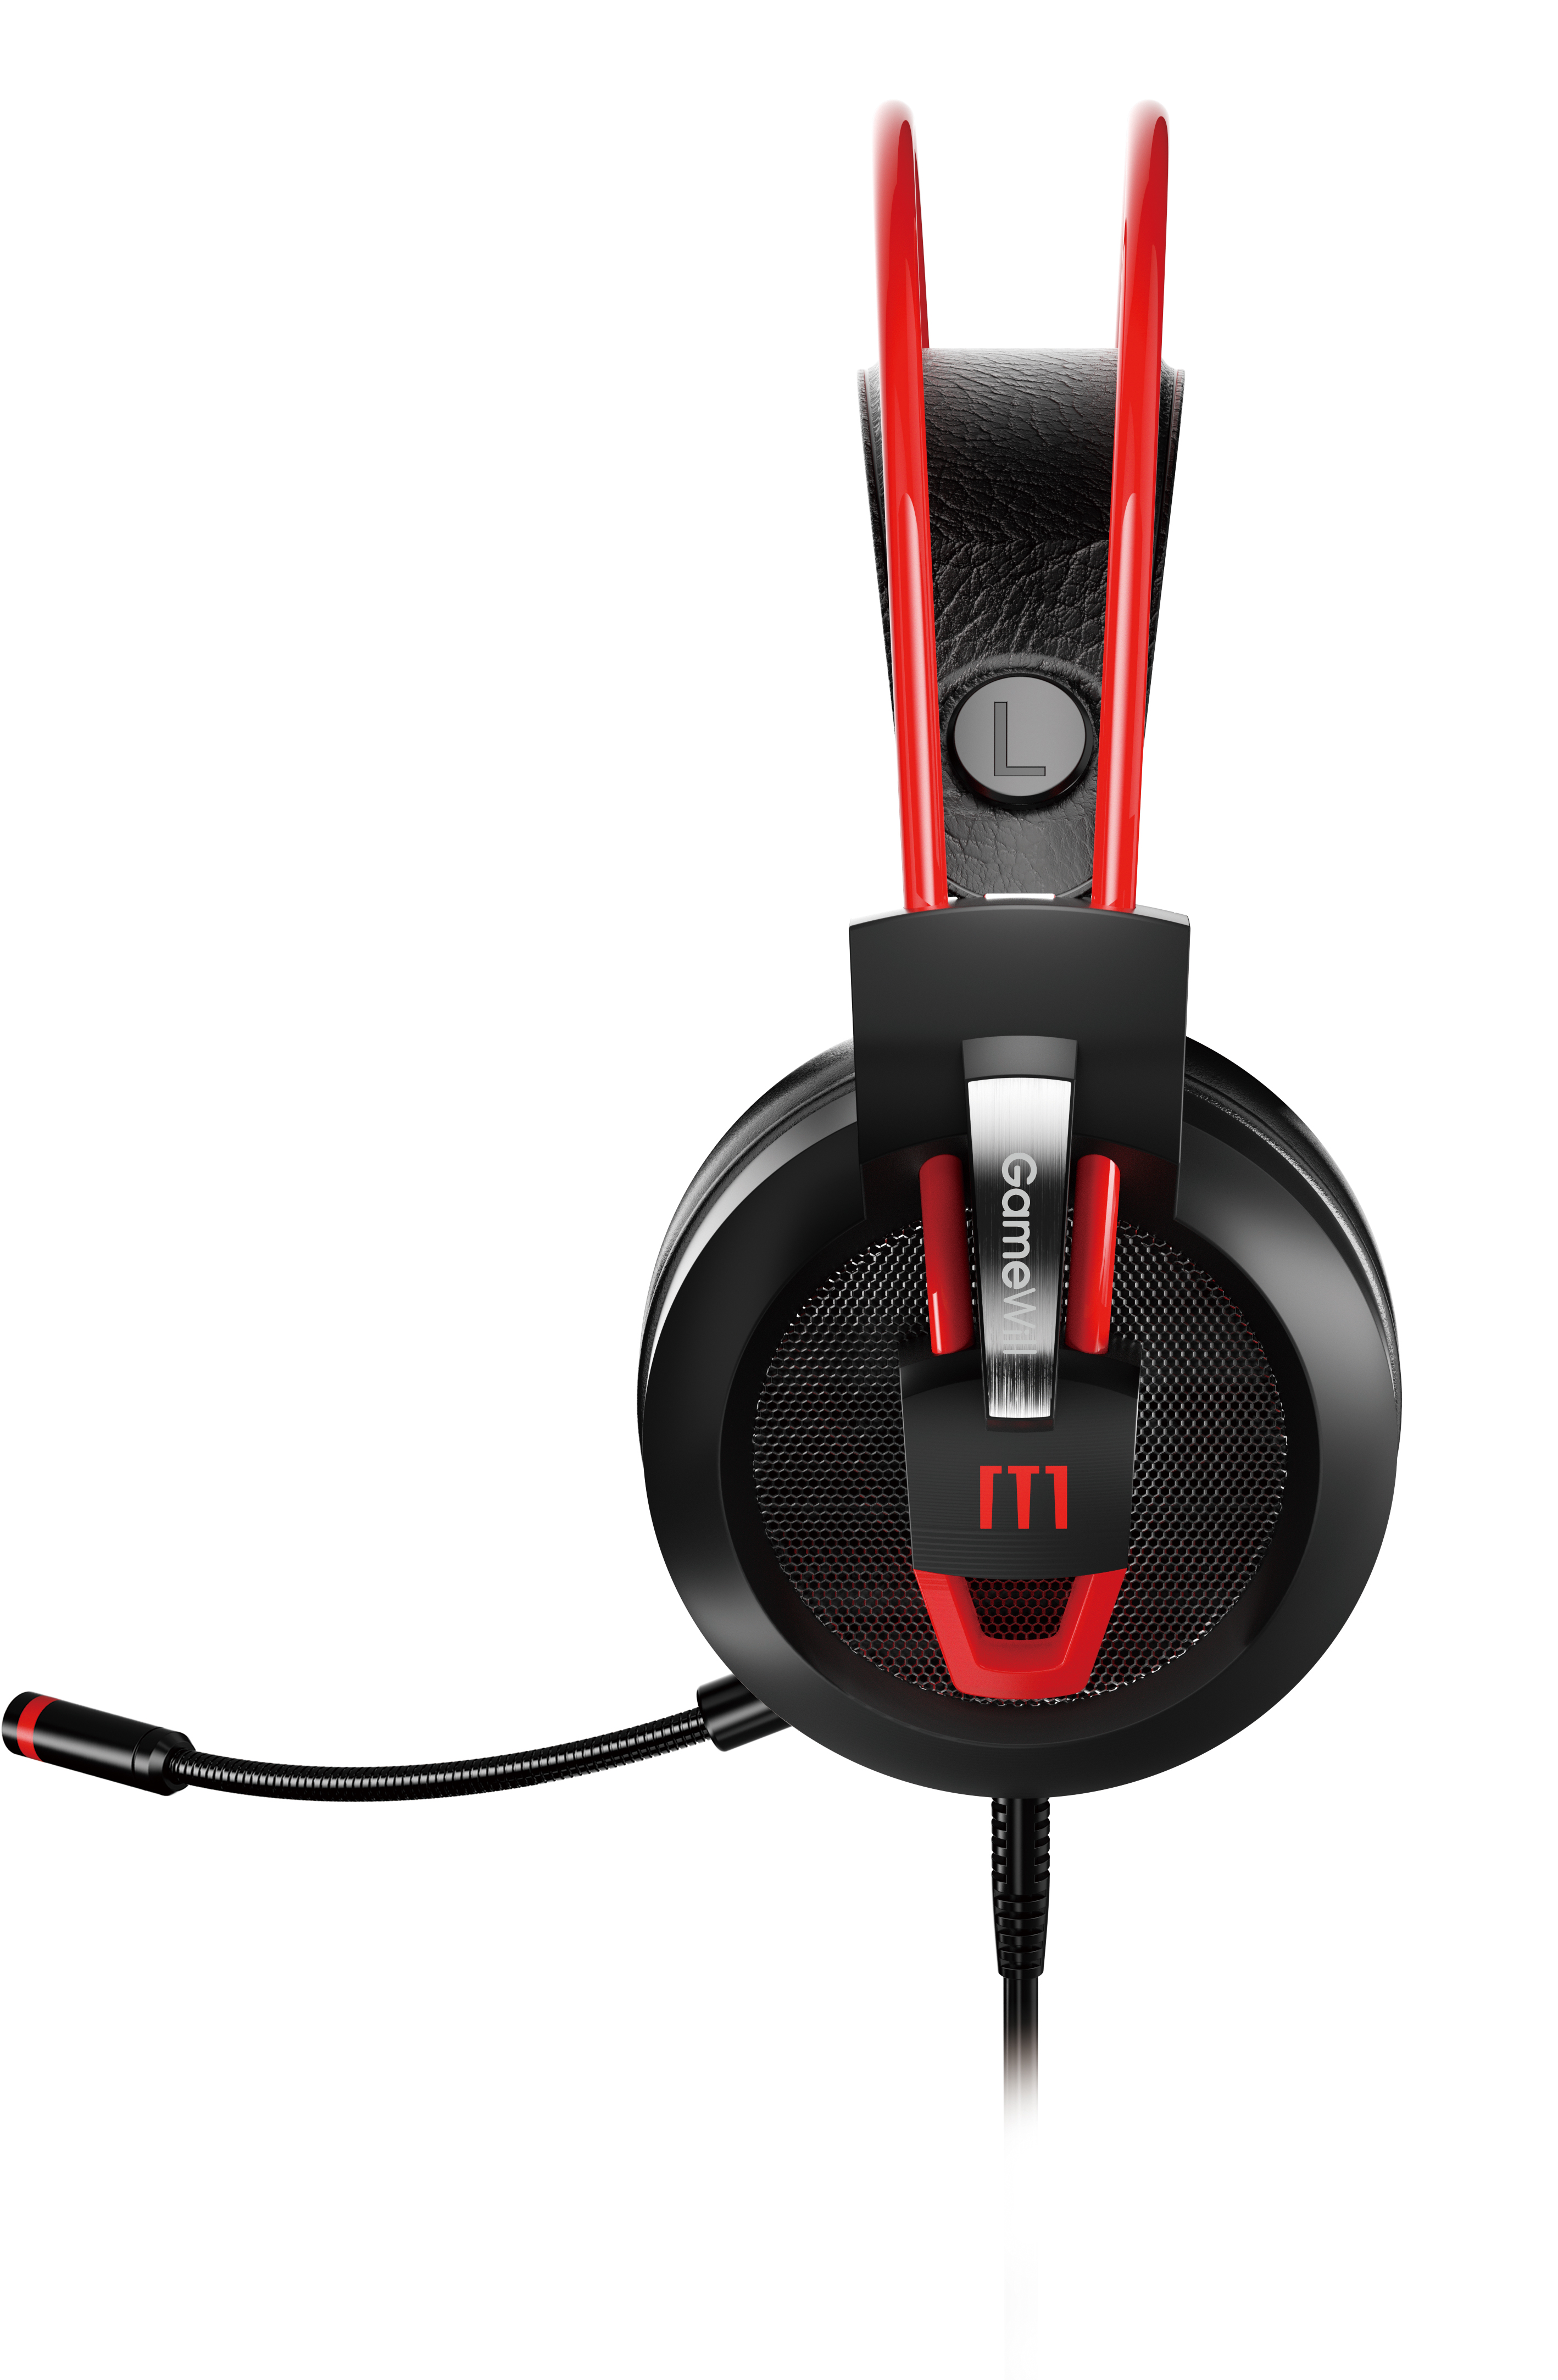 GameWill 7.1 Sound Channel Gaming Headset with USB port